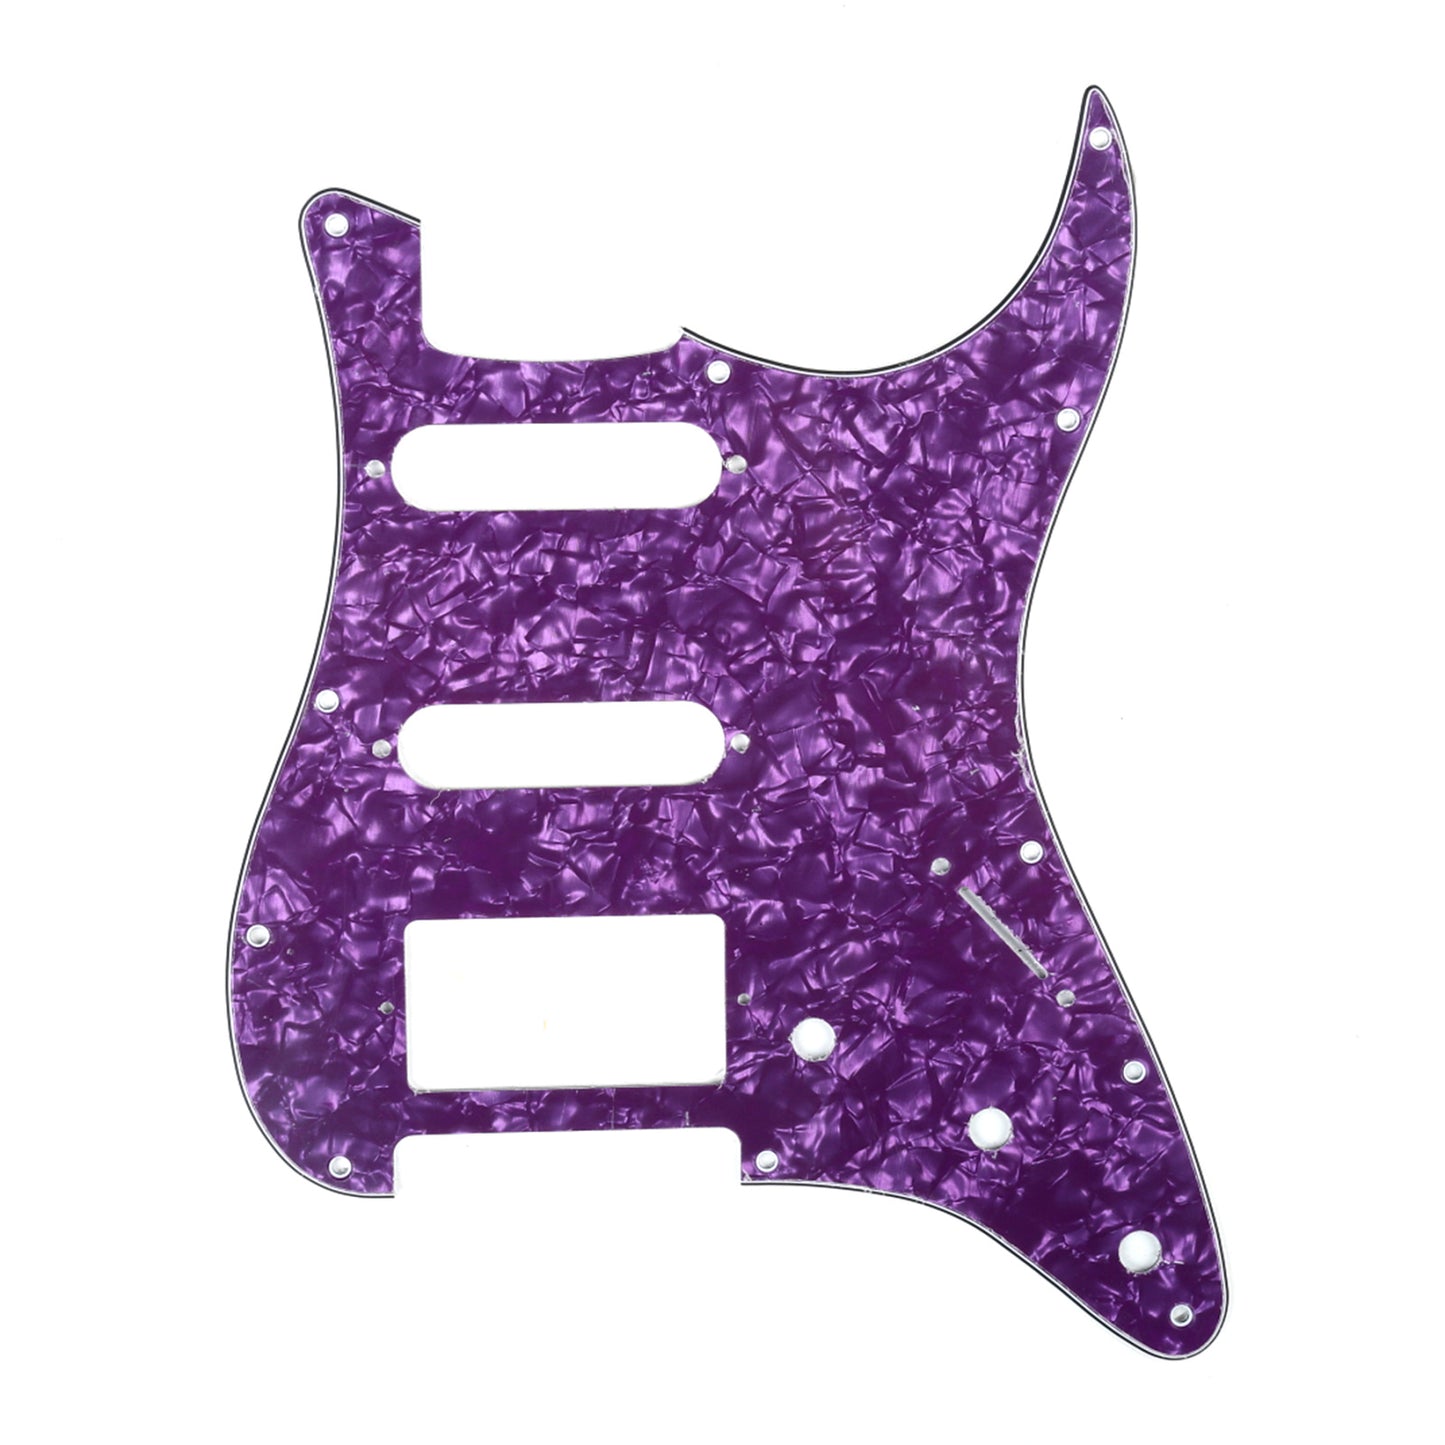 Musiclily HSS 11 Hole Guitar Strat Pickguard for Fender USA/Mexican Made Standard Stratocaster Modern Style, 4Ply Purple Pearl